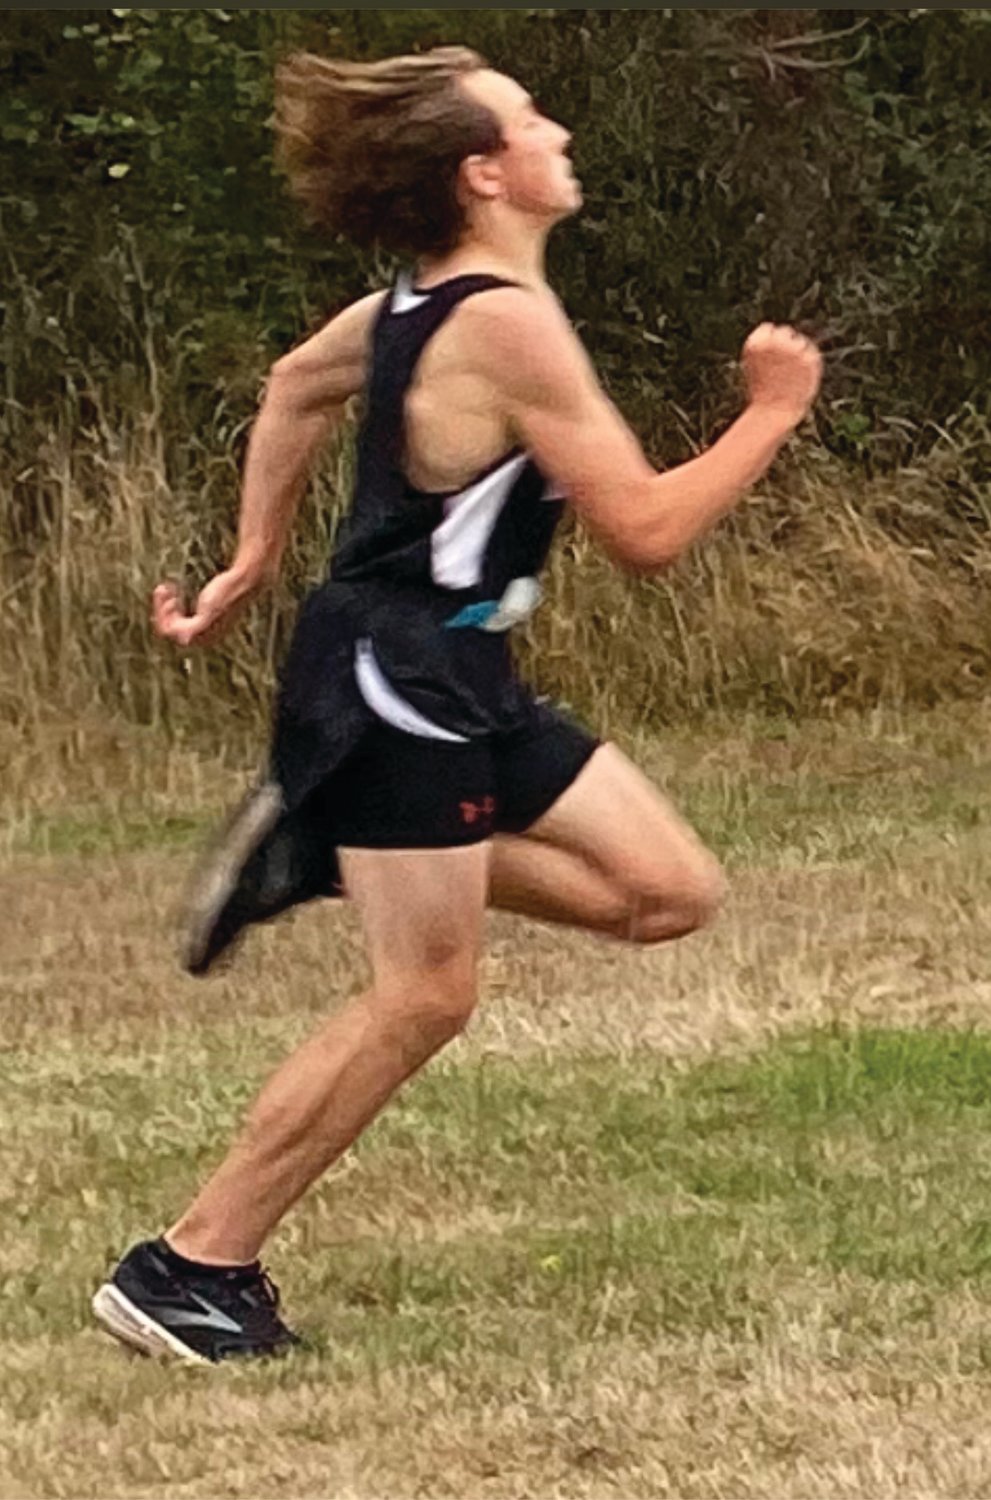 Grady White gives it his all in winning his third cross country race of the season.